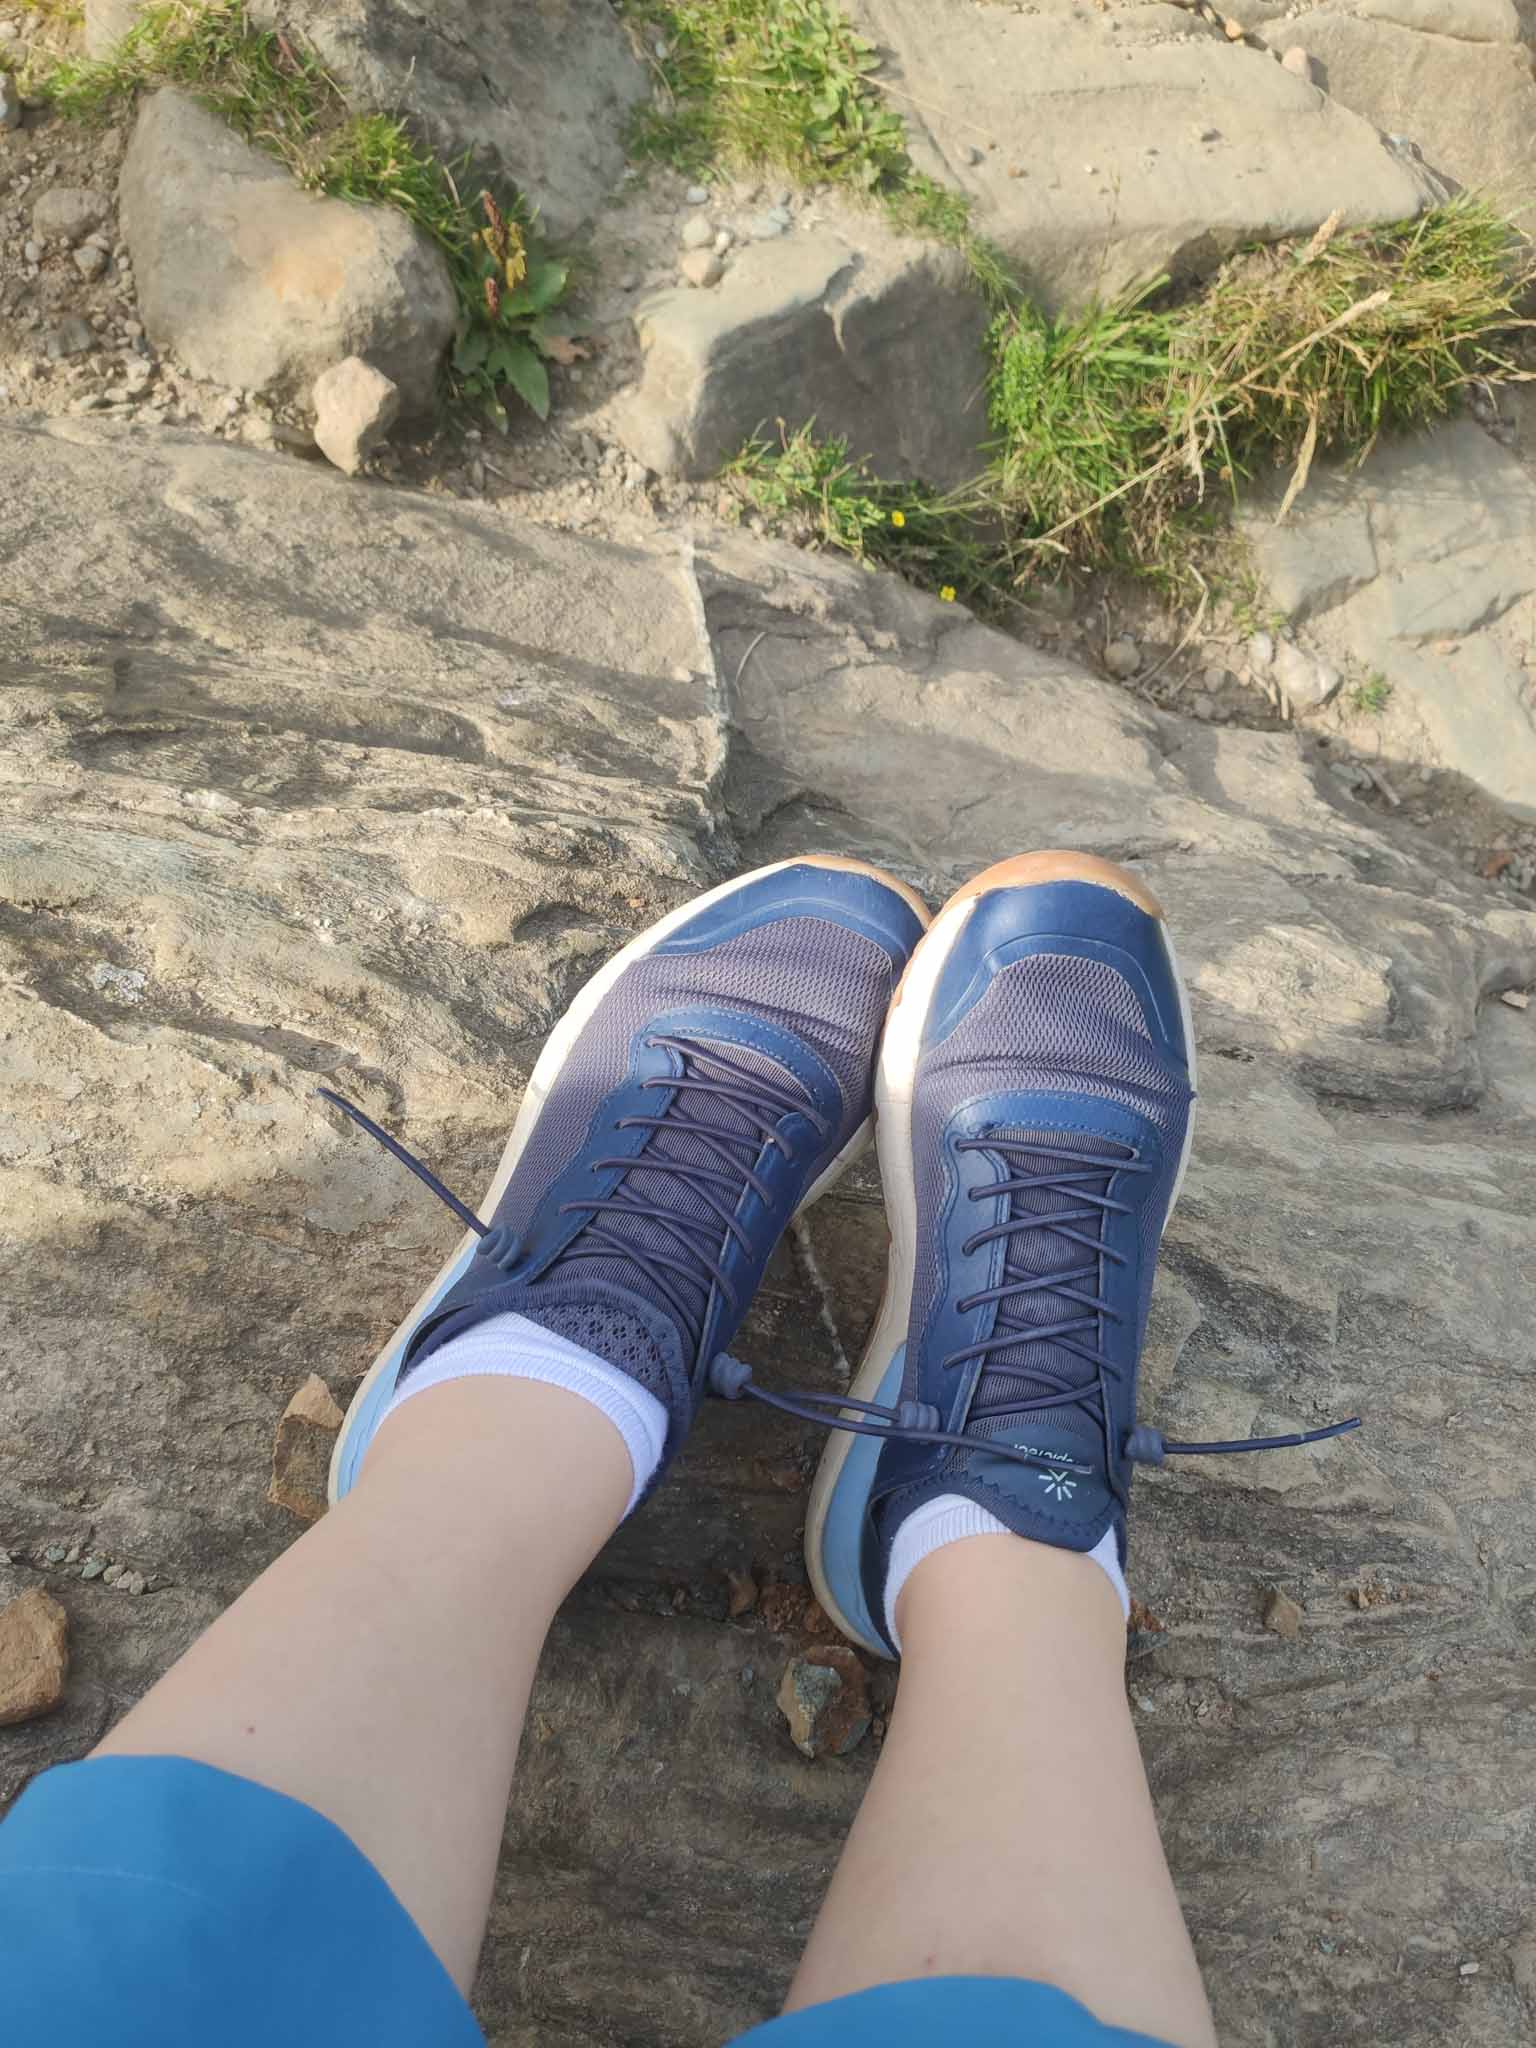 TropicFeel review  How does the Canyon rate as a travel shoe